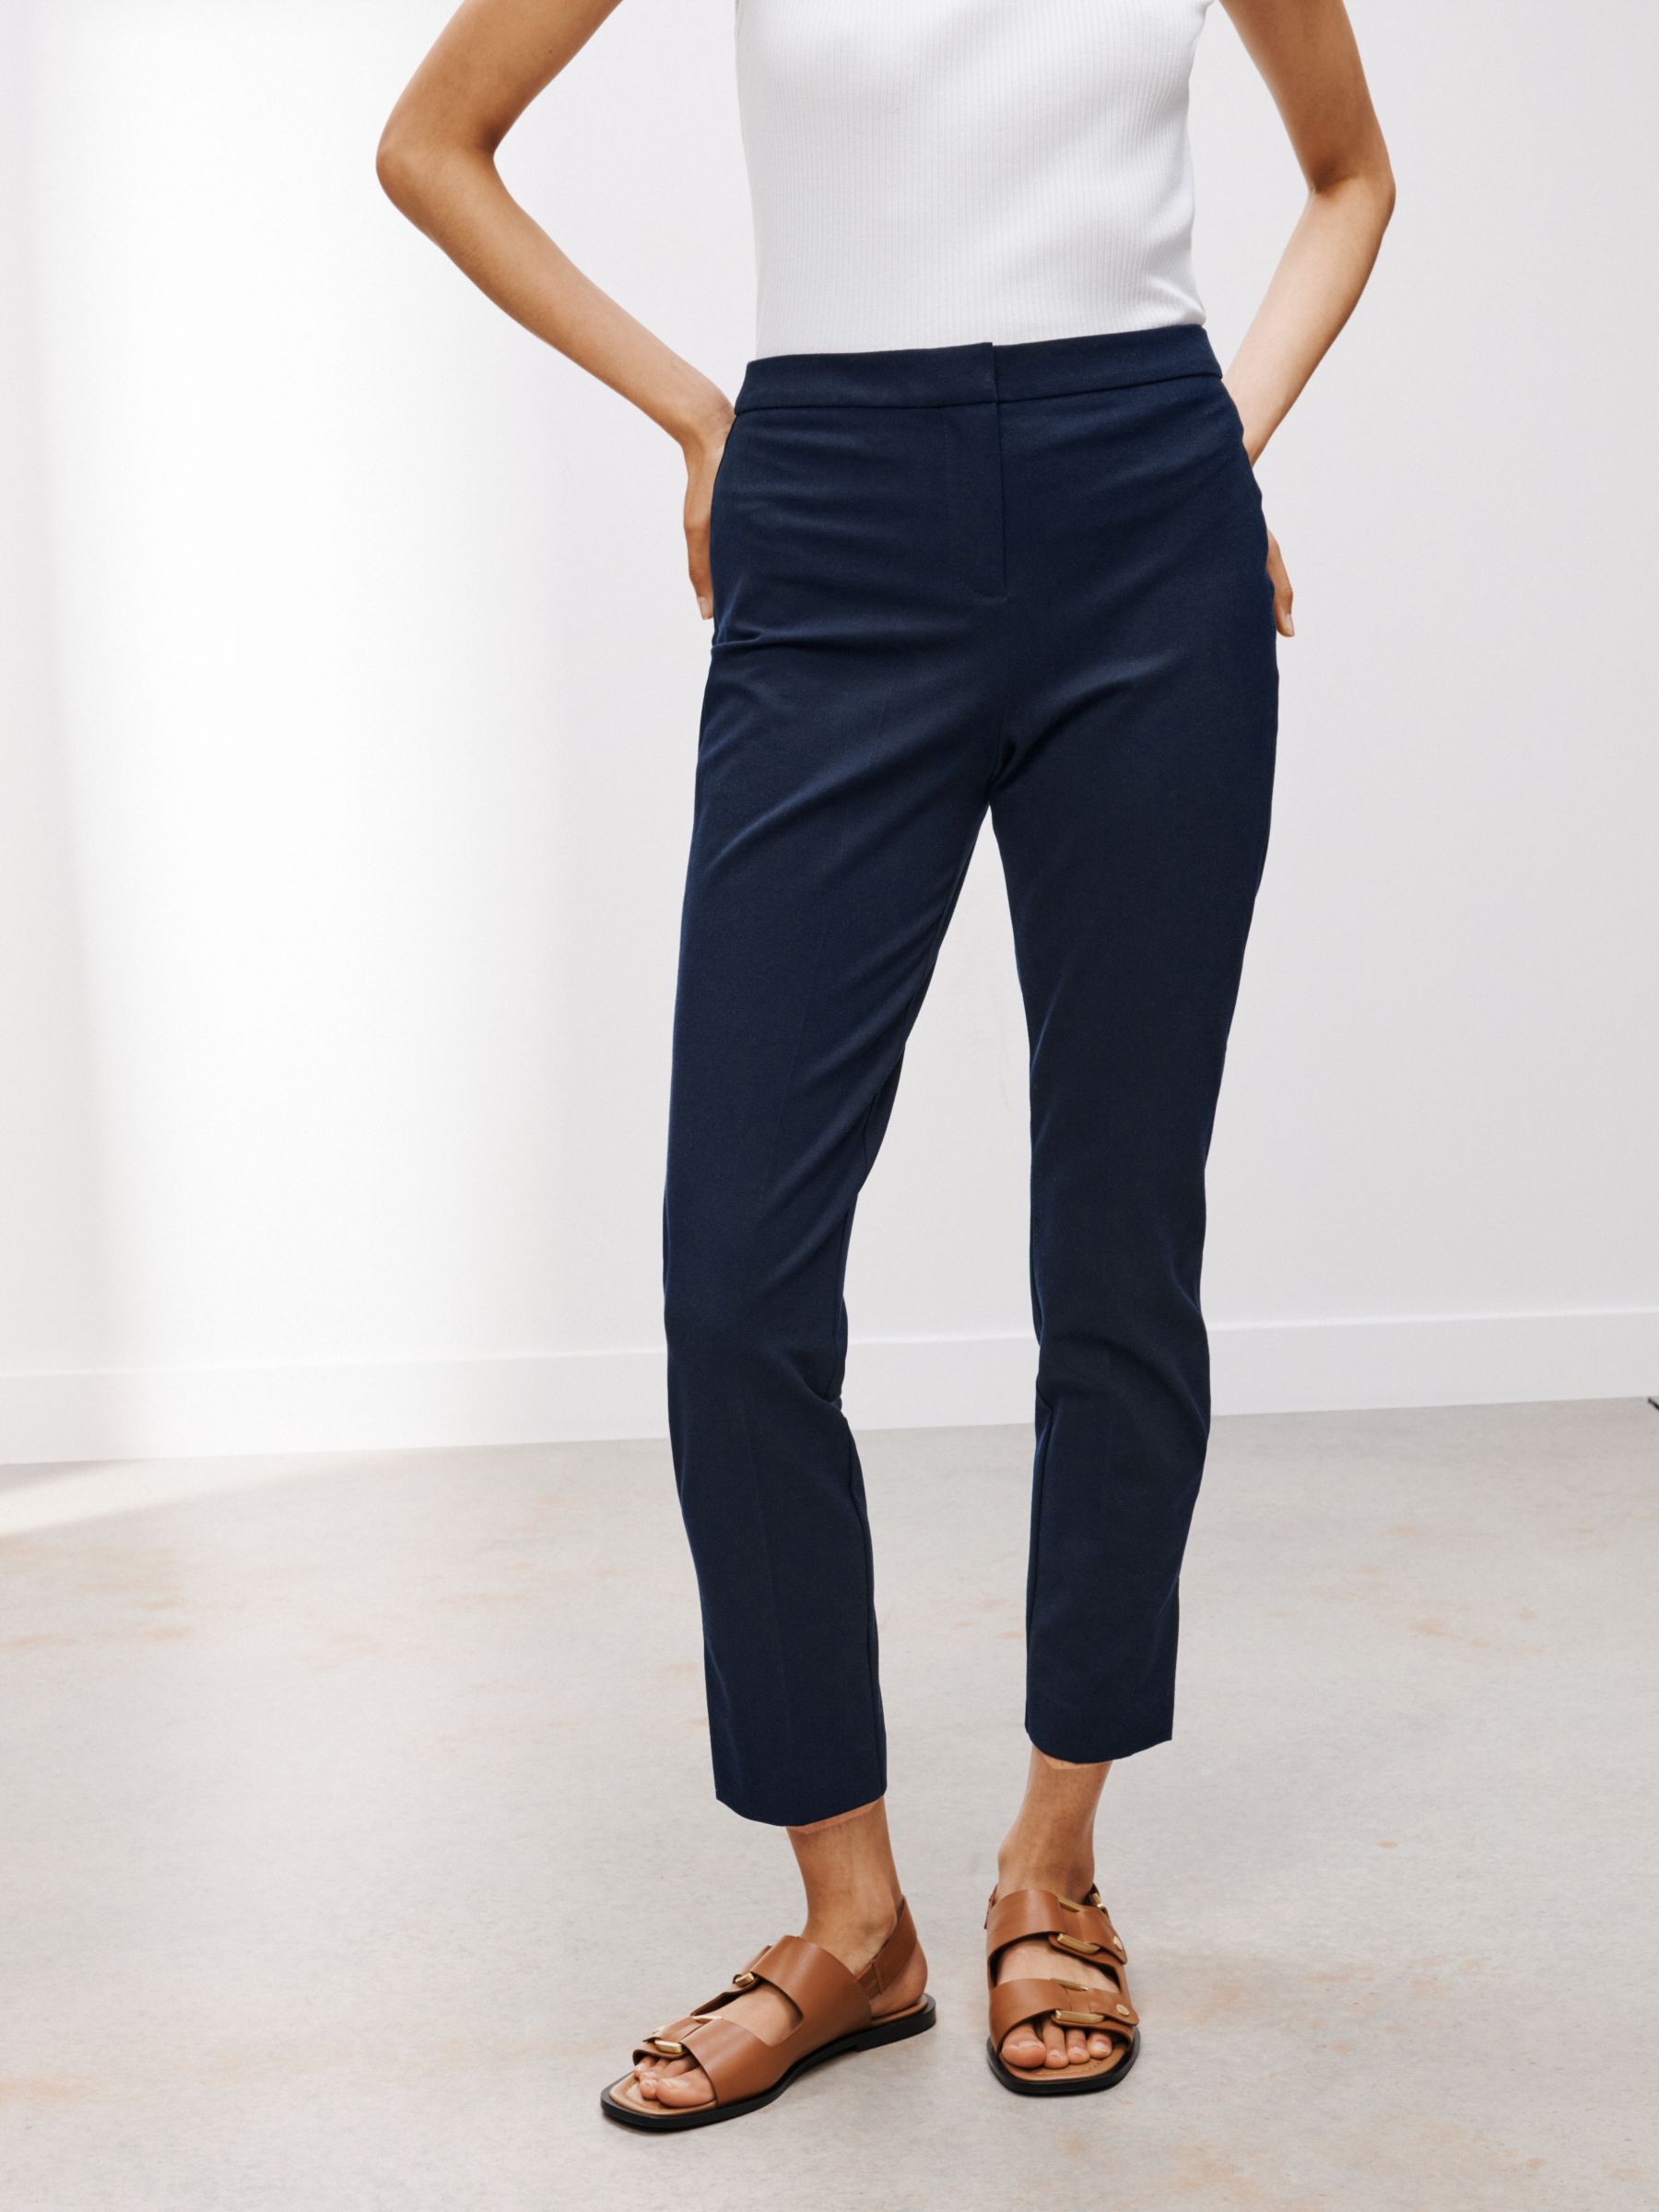 Jean Style Ponte Stretch Trouser Black - New In from Yumi UK